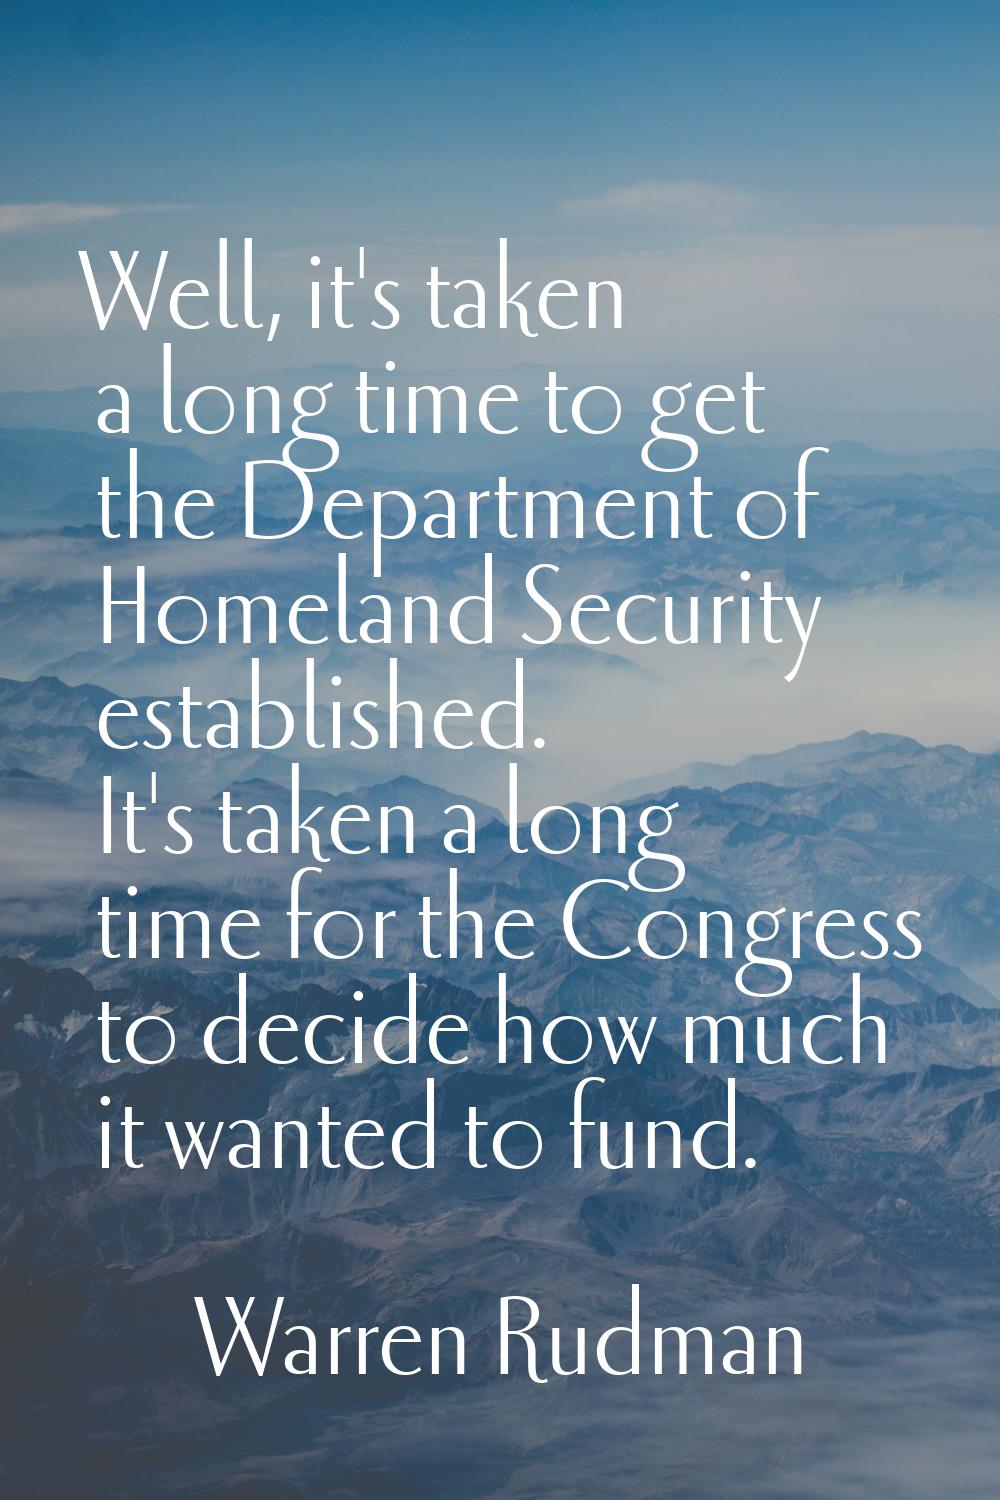 Well, it's taken a long time to get the Department of Homeland Security established. It's taken a l